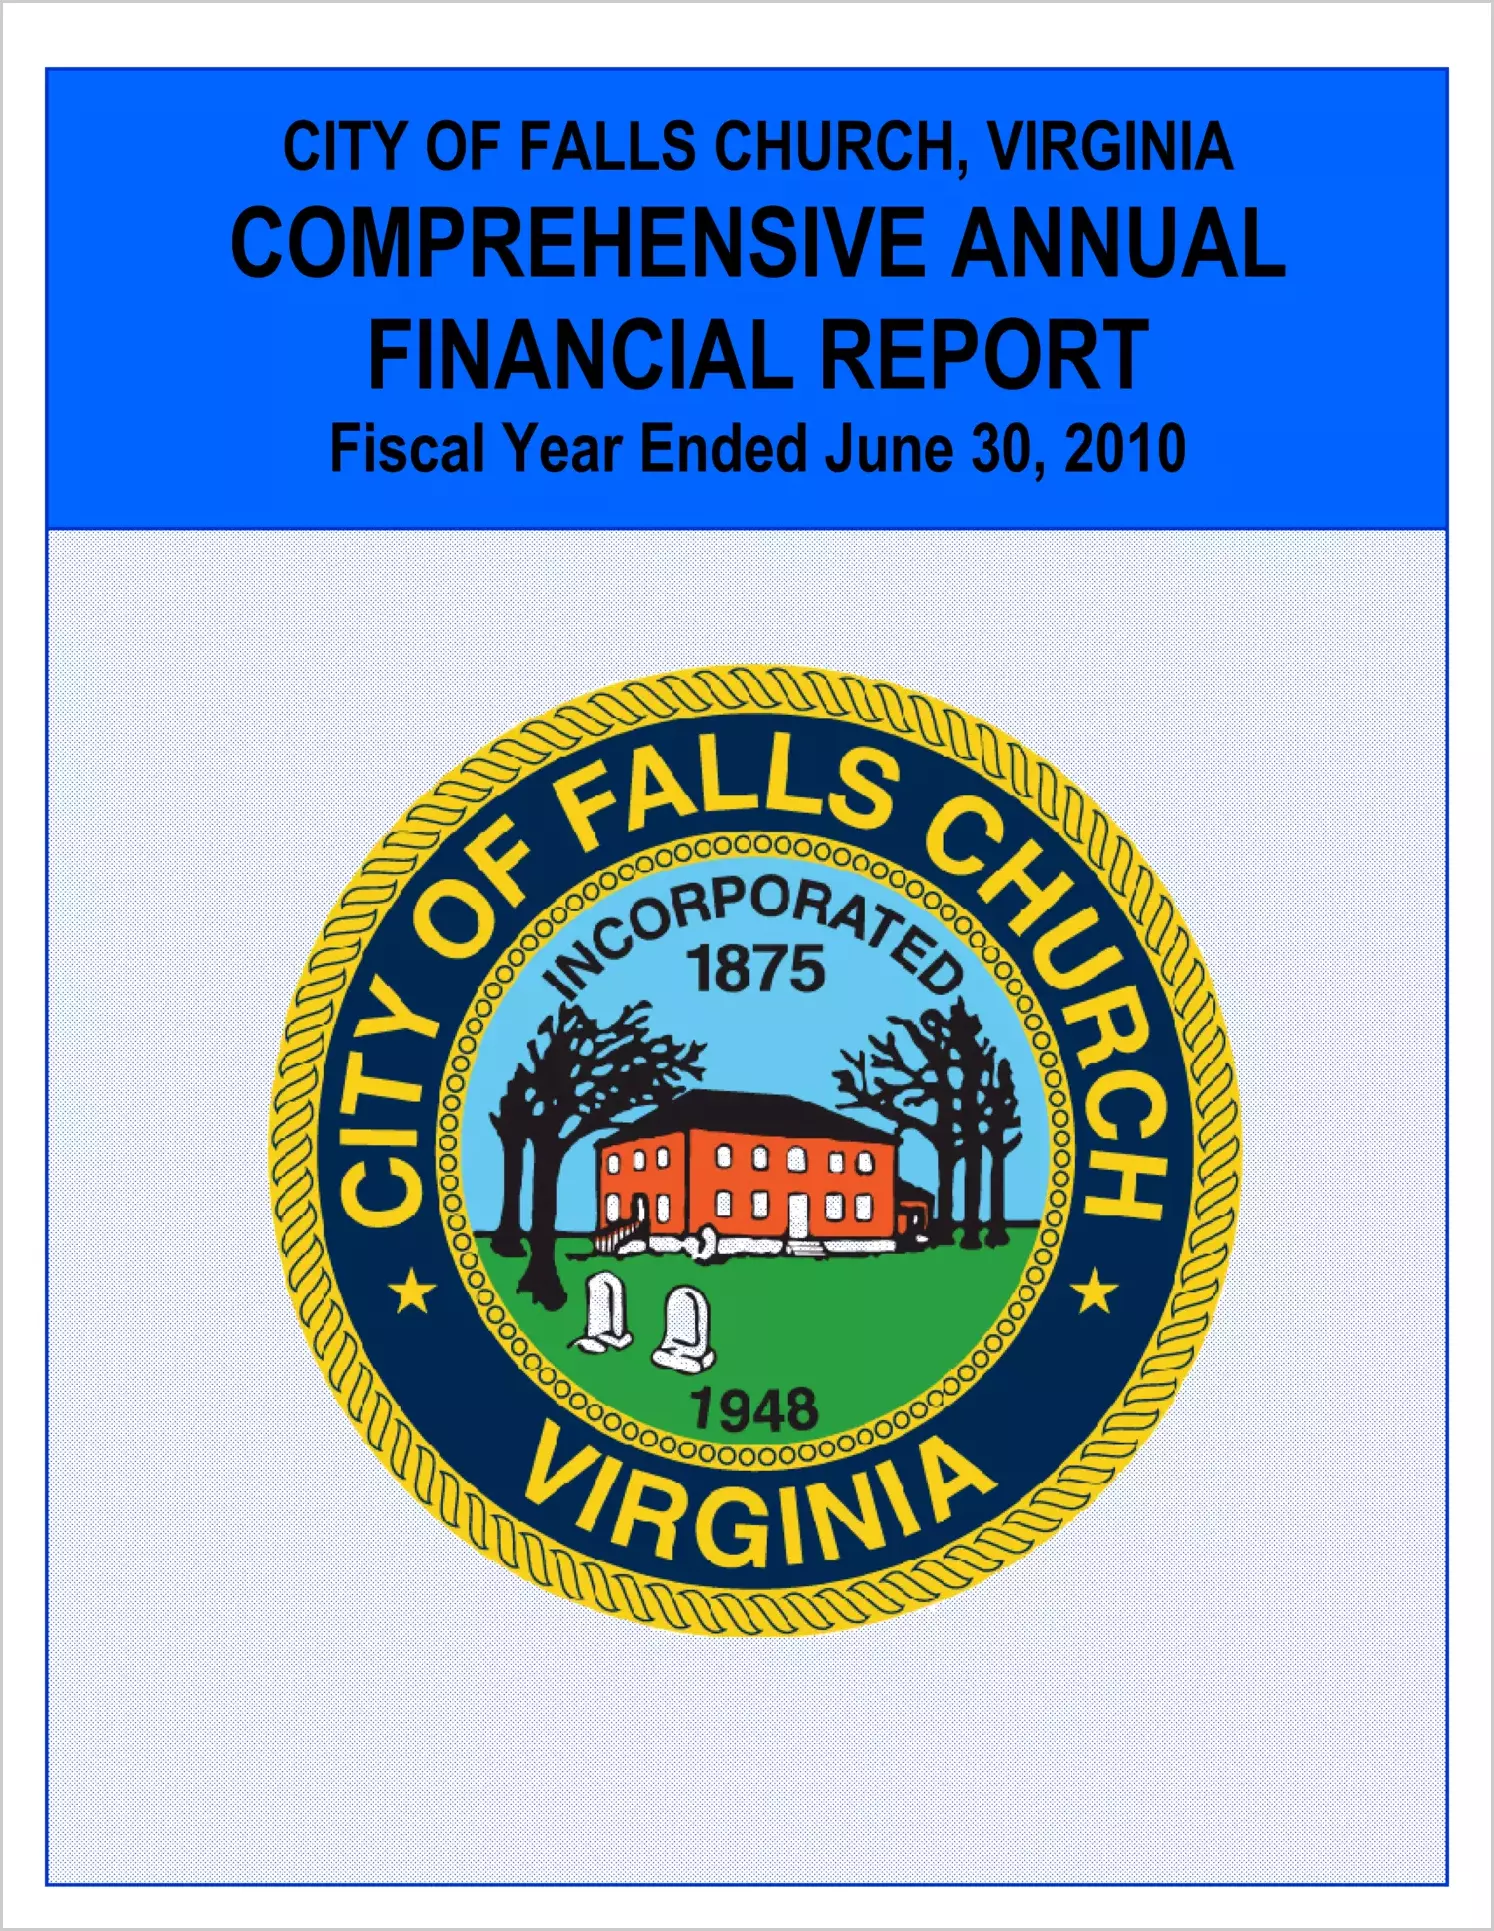 2010 Annual Financial Report for City of Falls Church